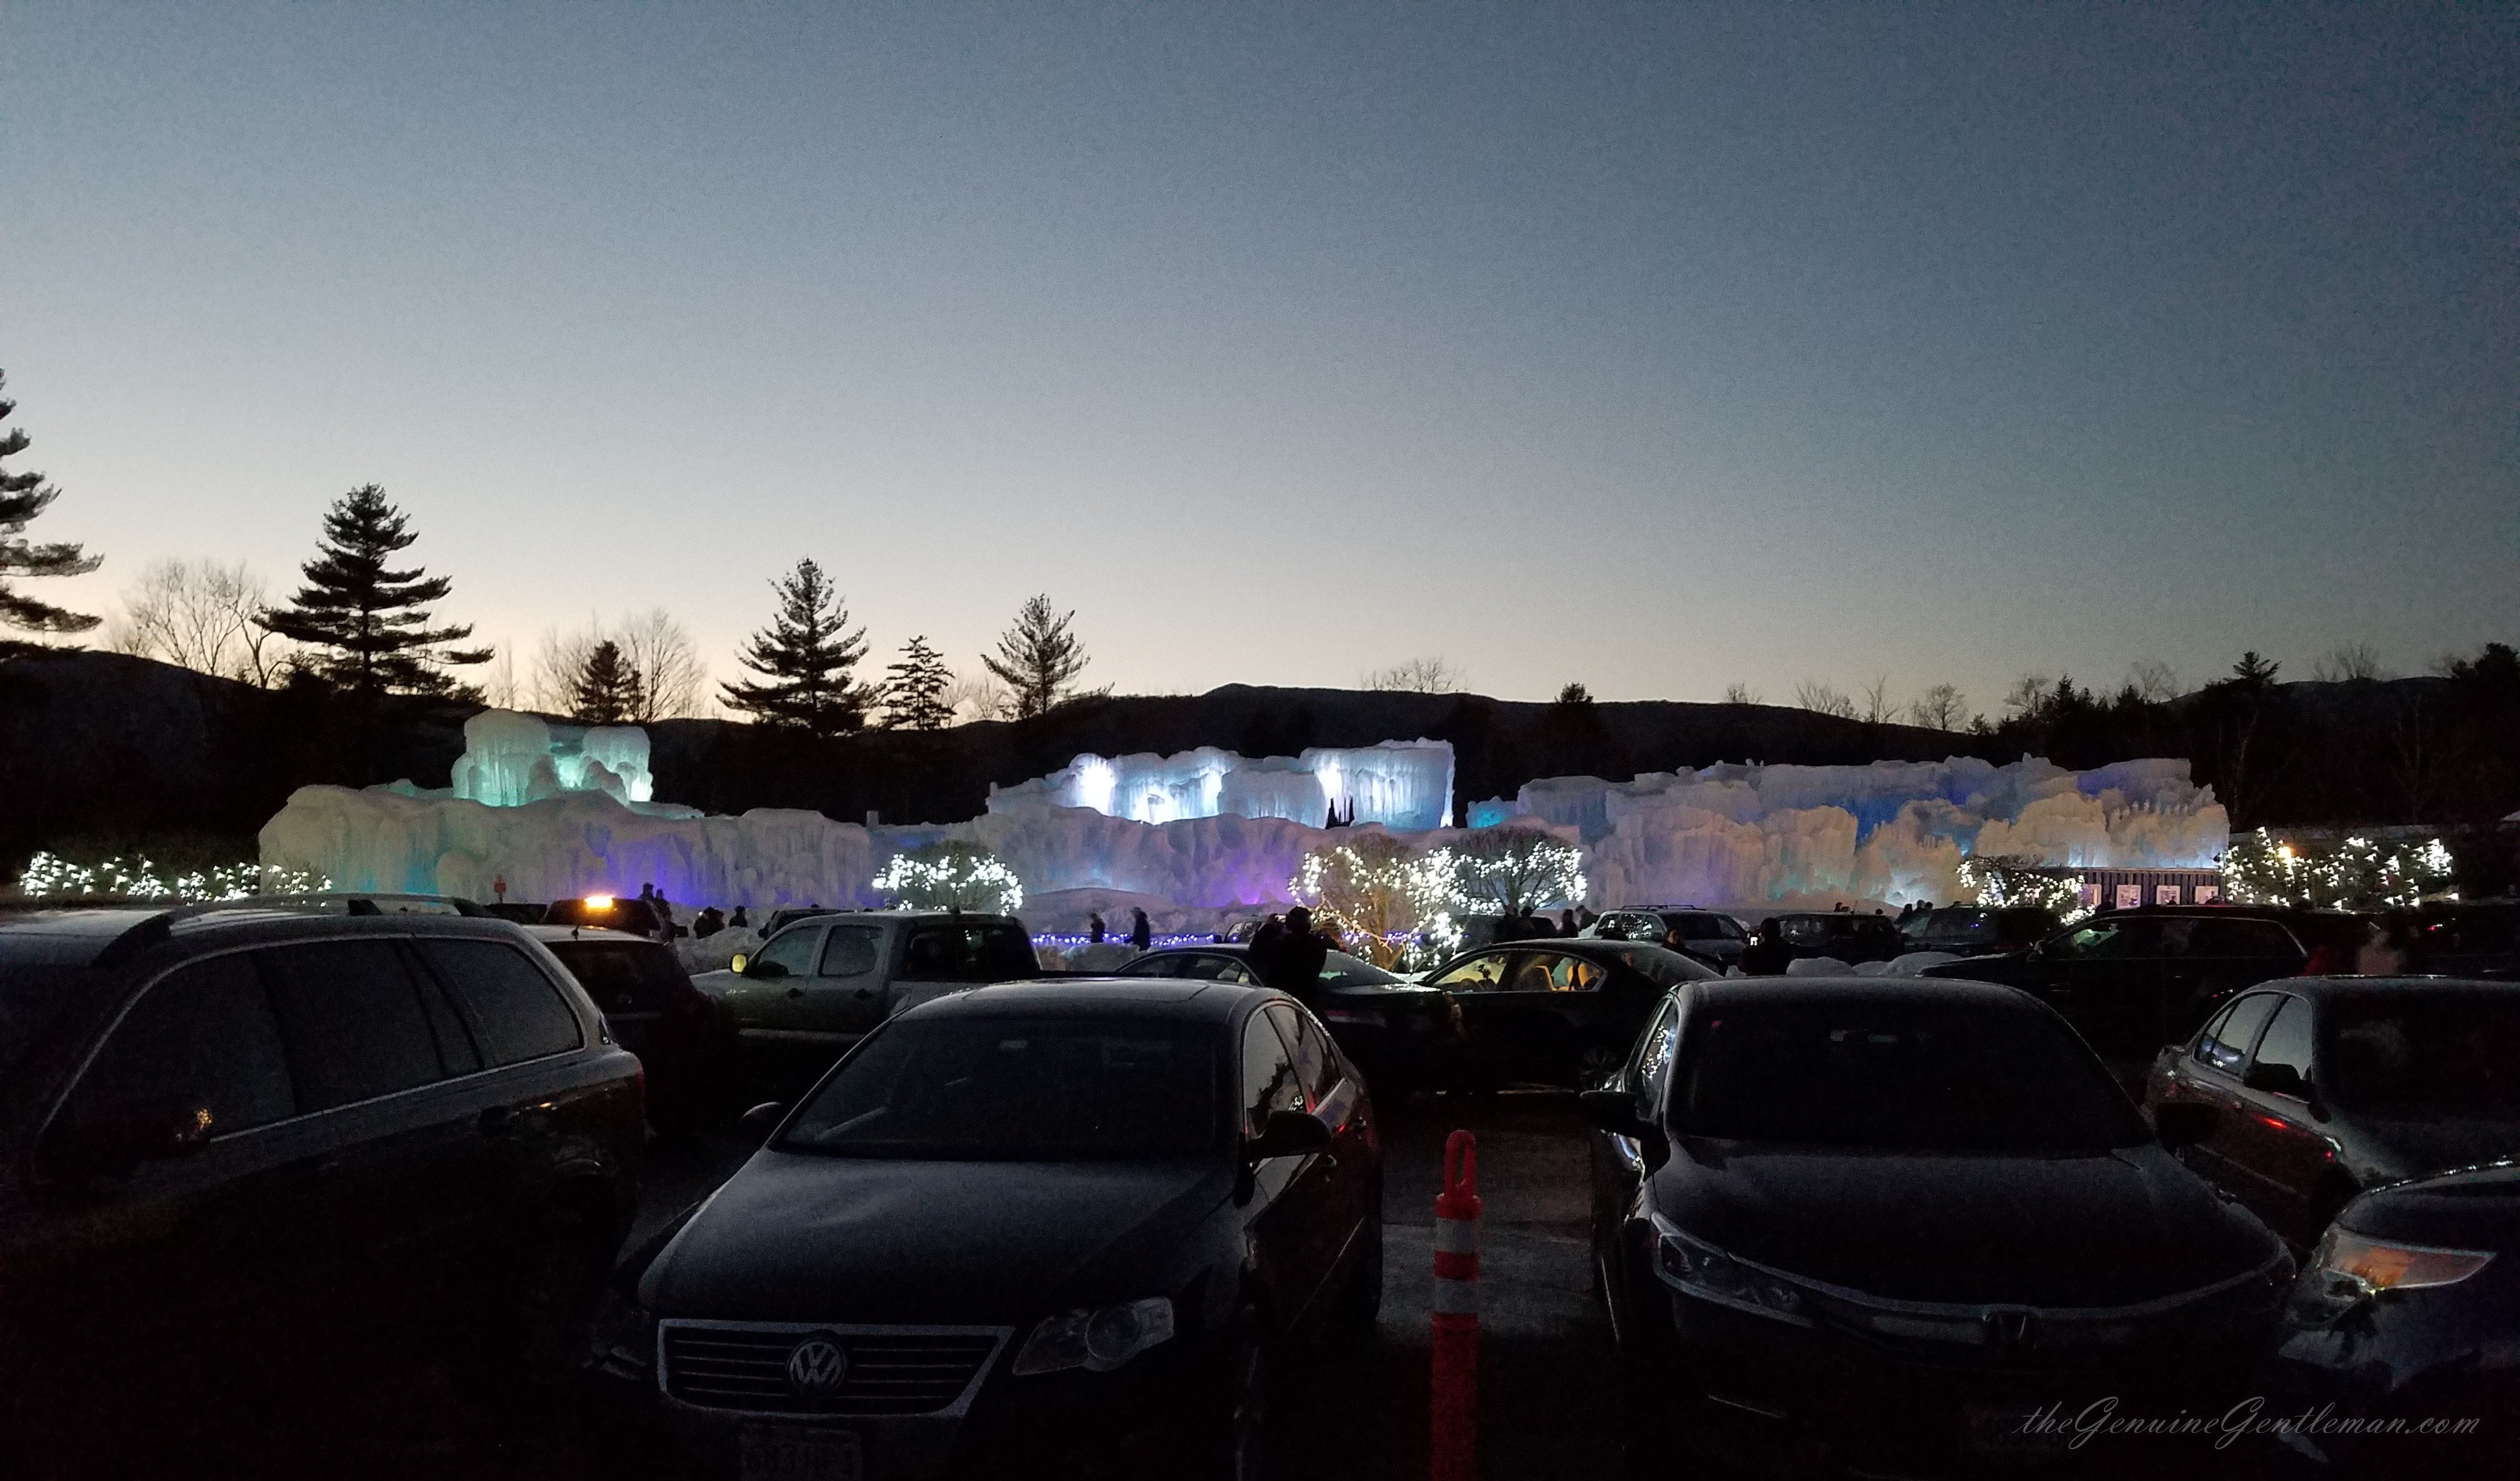 Ice Castle - Parking Lot, Lincoln New Hampshire